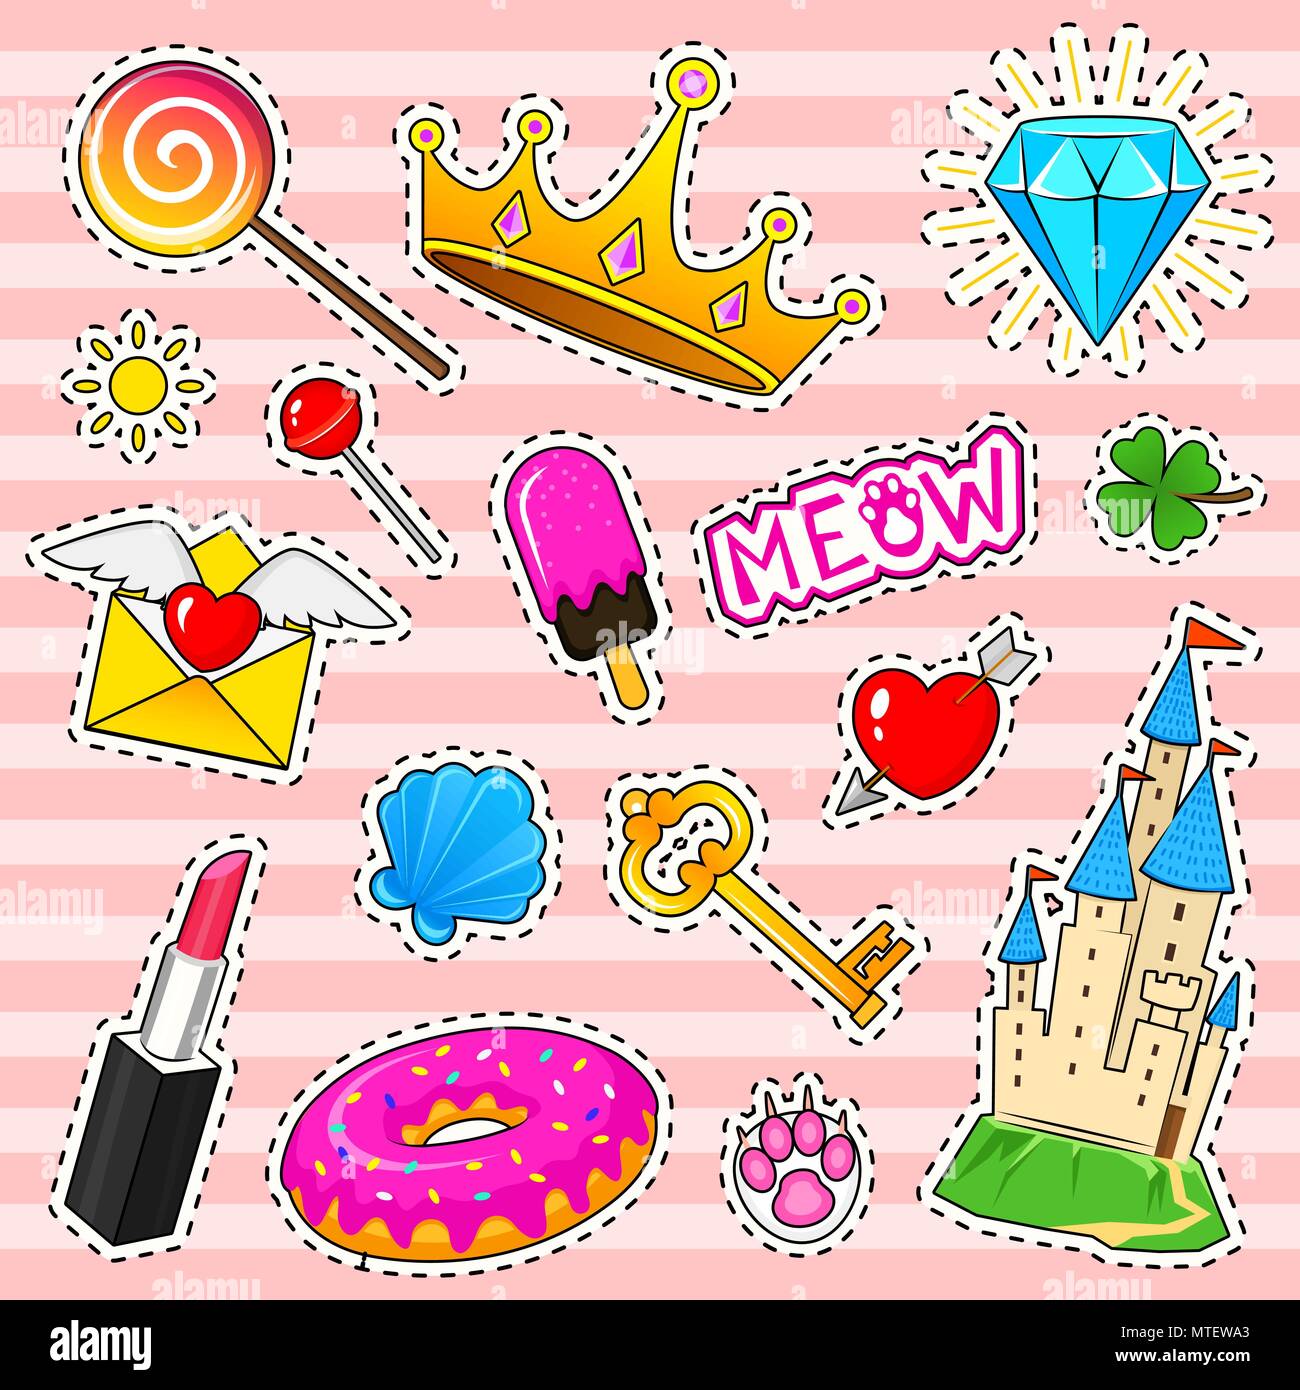 Vector Set Of Cute Funny Patches And Stickers In 90s Style.Modern